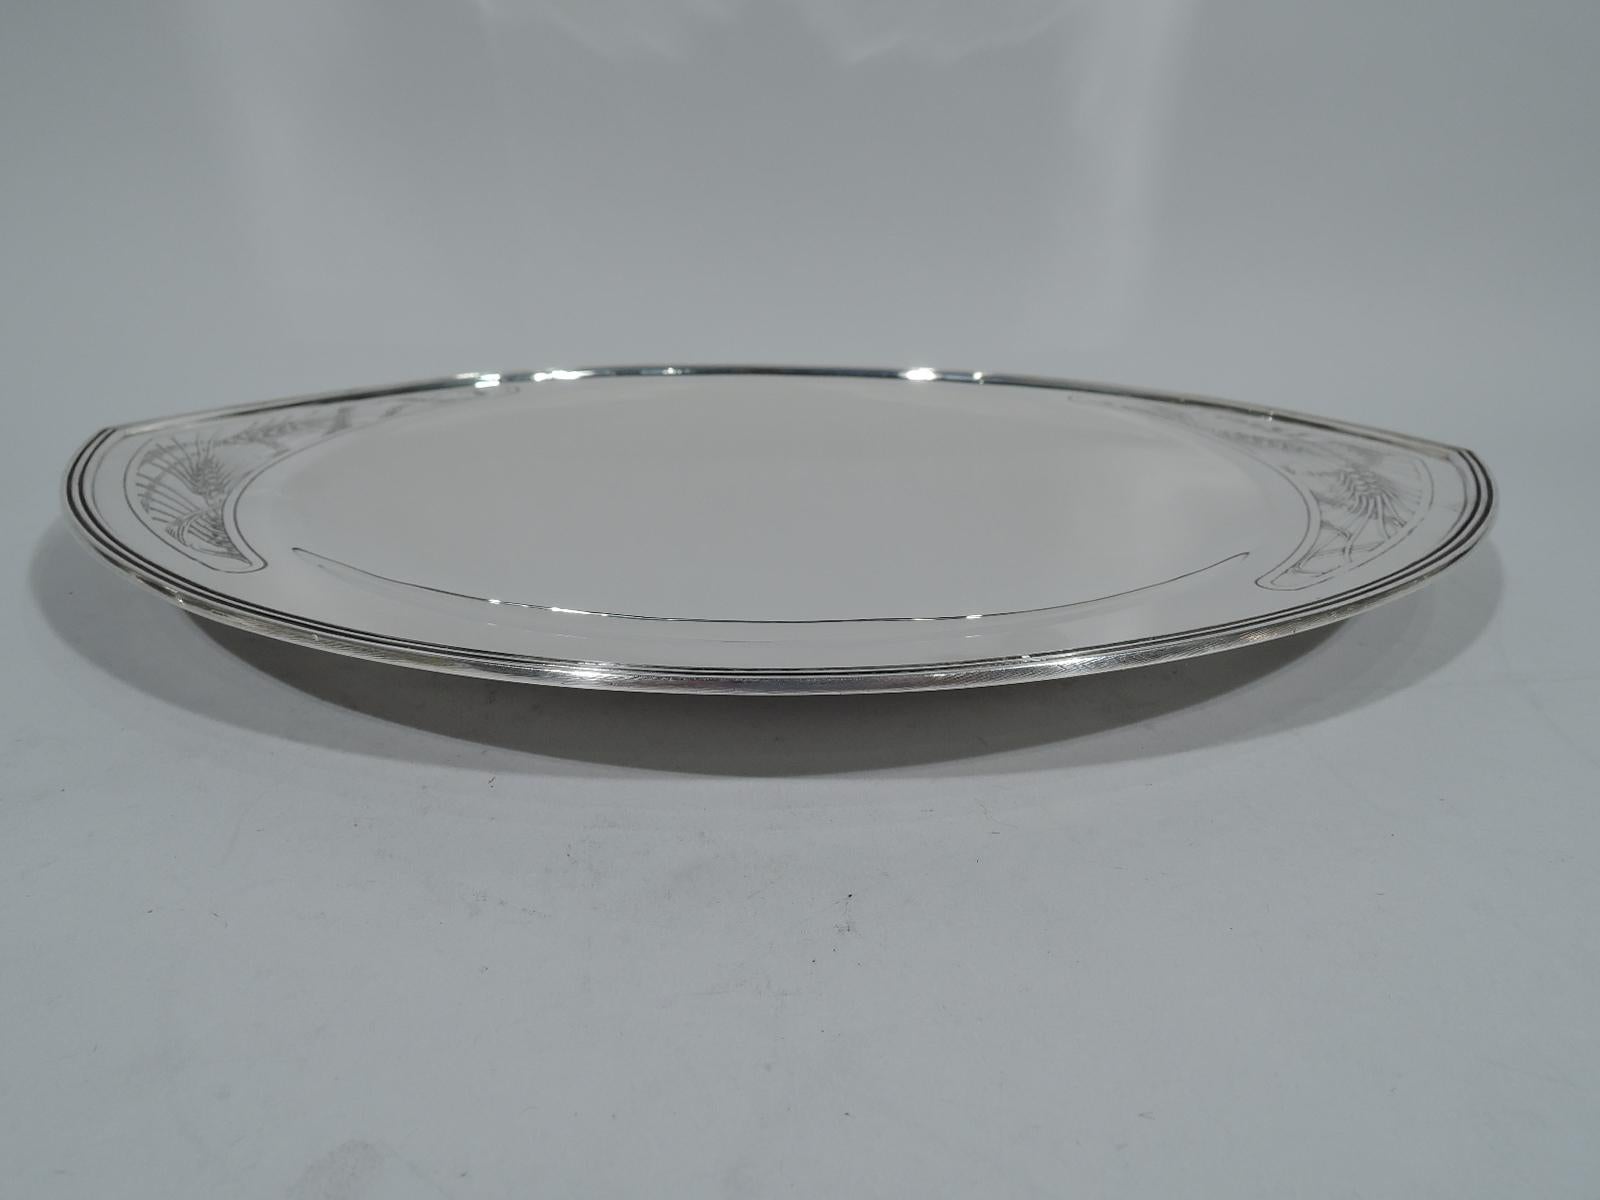 Art Deco sterling silver bread tray. Made by Tiffany & Co. in New York. Pointed oval with round shallow bowl. Ends have shaped frames with acid-etched and stylized grain heads and stalks. A stylish and wholesome addition to the dinner table.